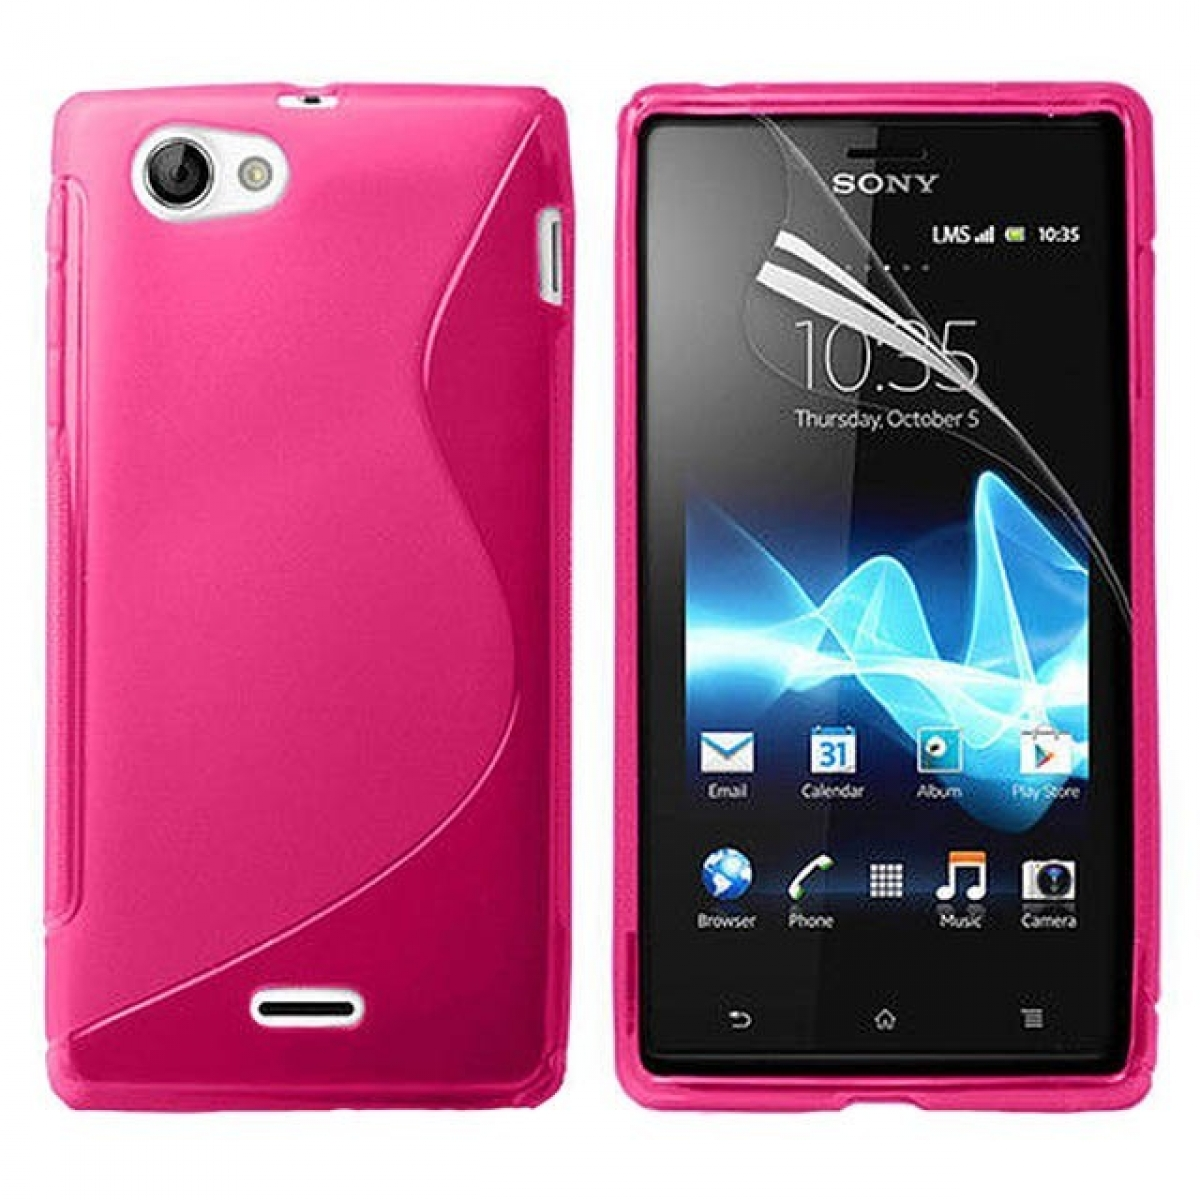 Backcover, S-Line J, Xperia CASEONLINE Multicolor Sony, - Pink,